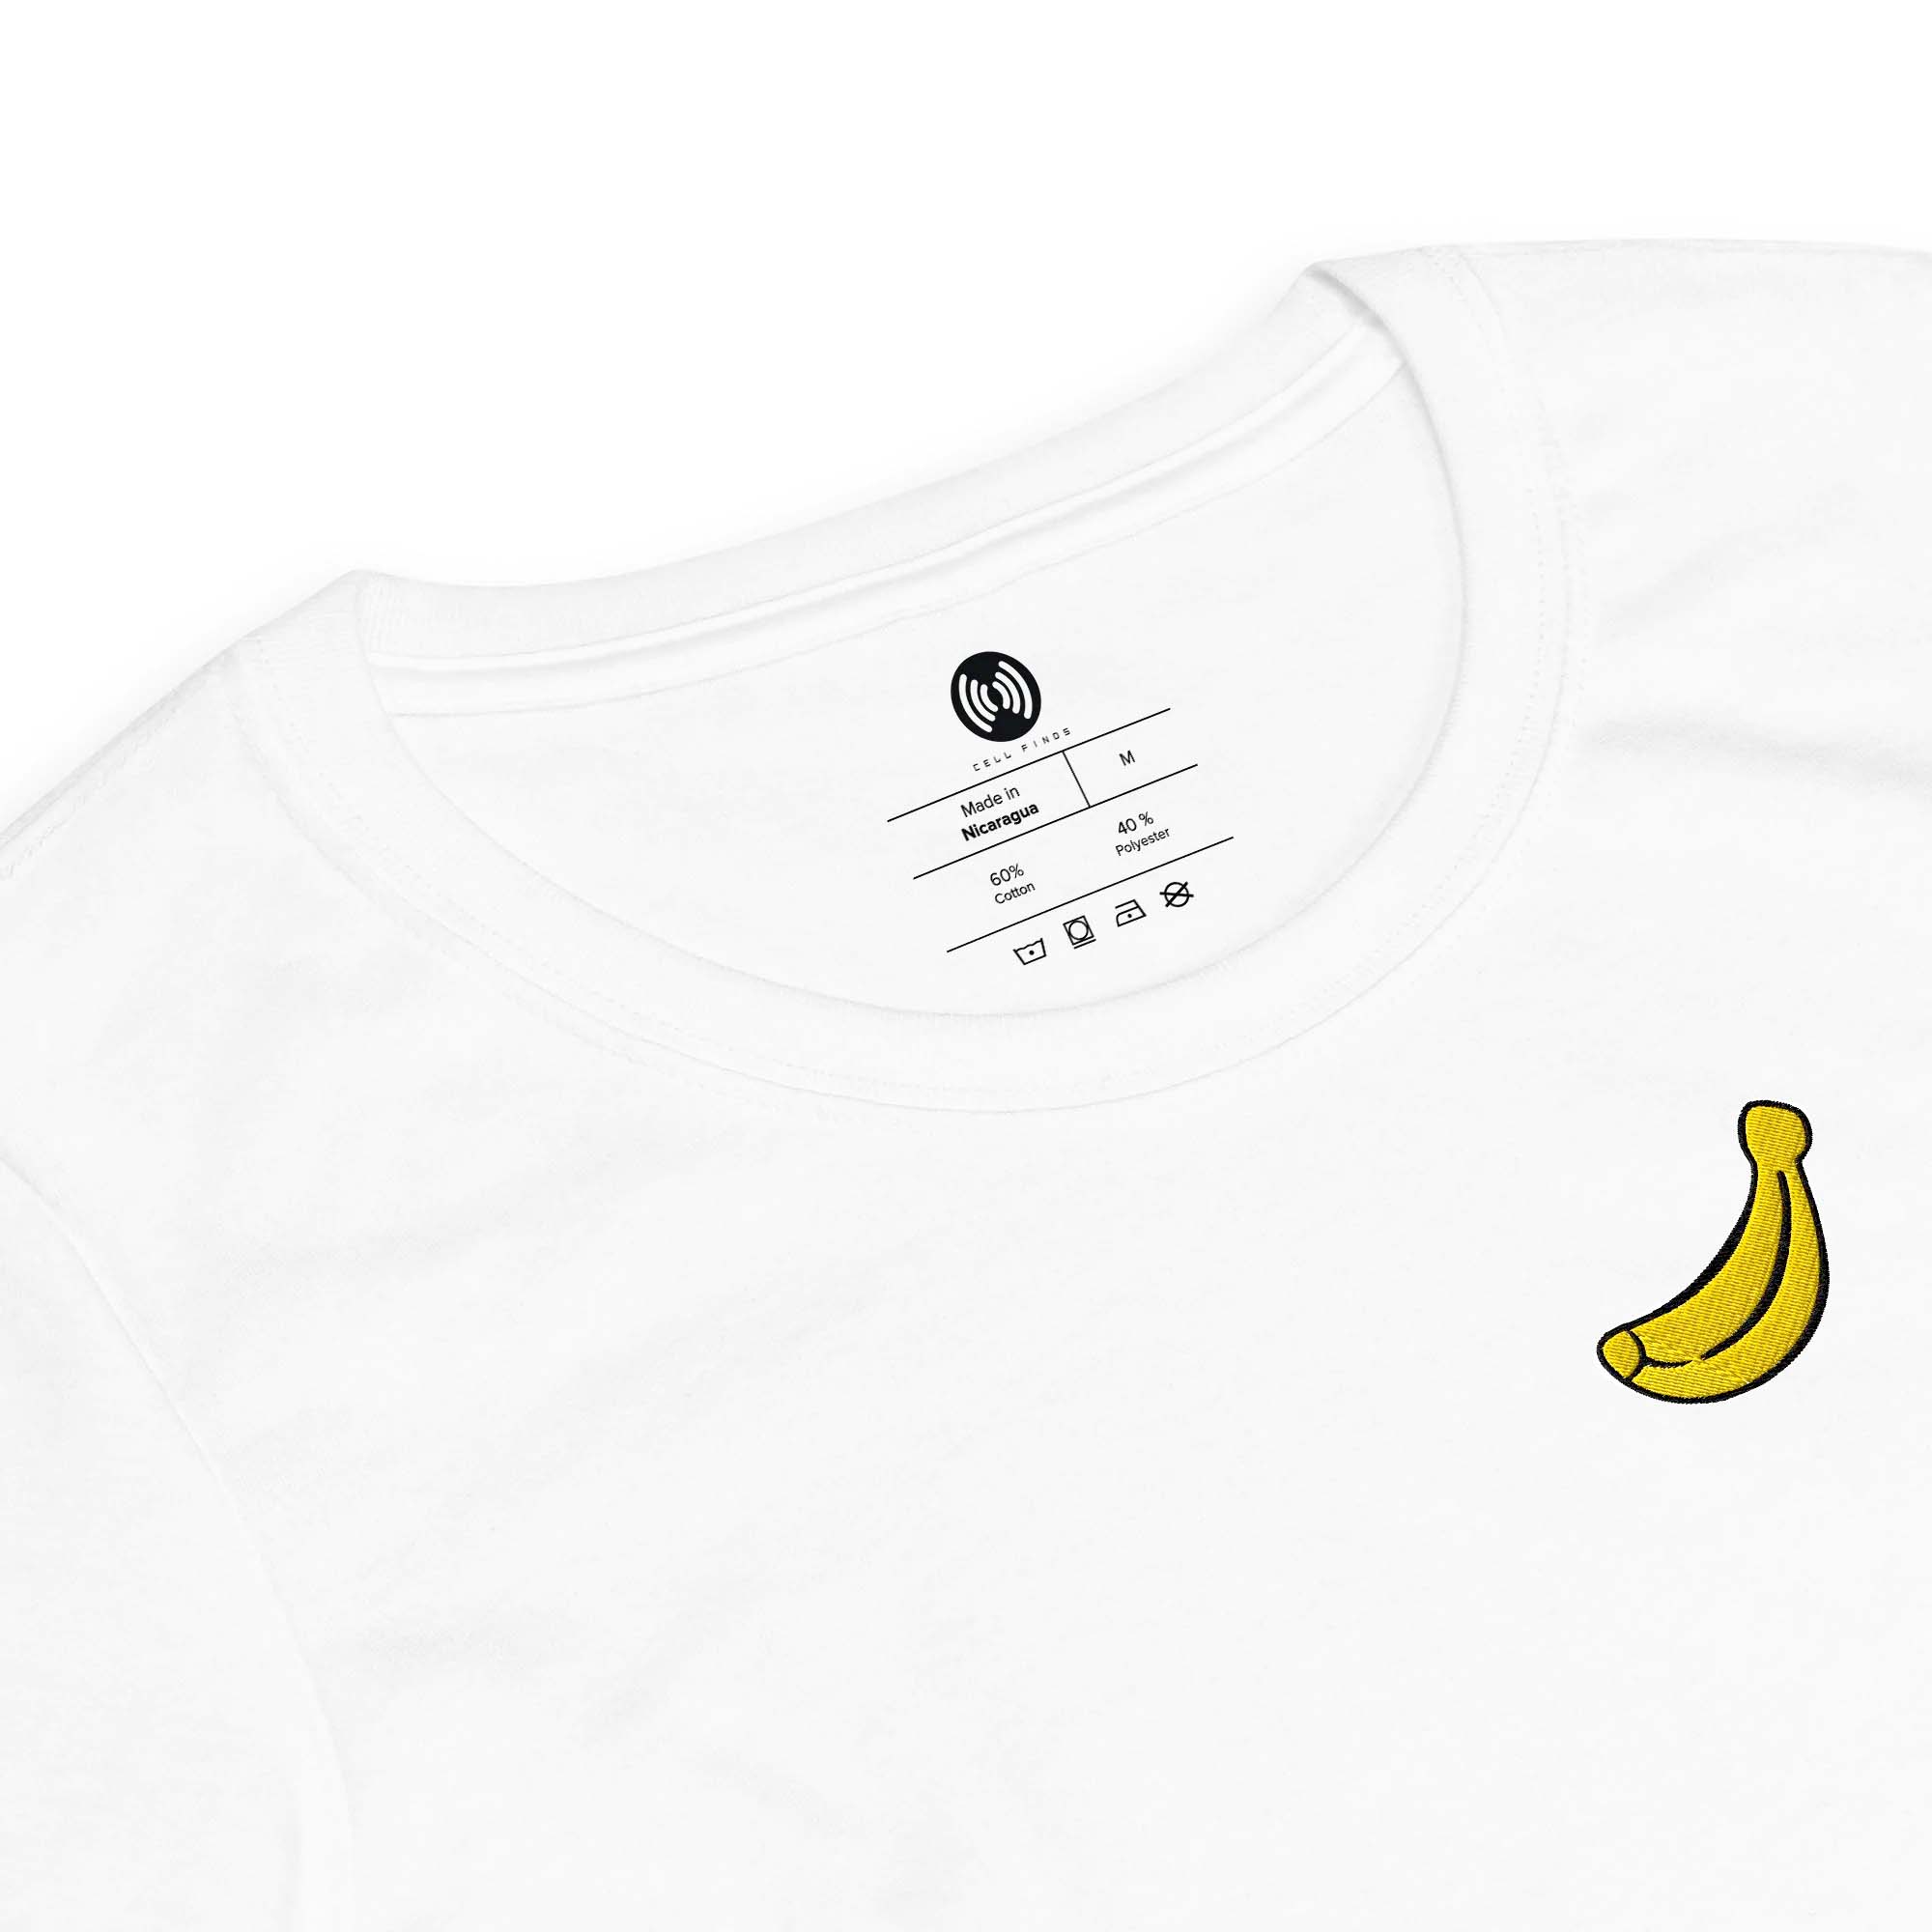 Embroidered Banana Women’s fitted t-shirt